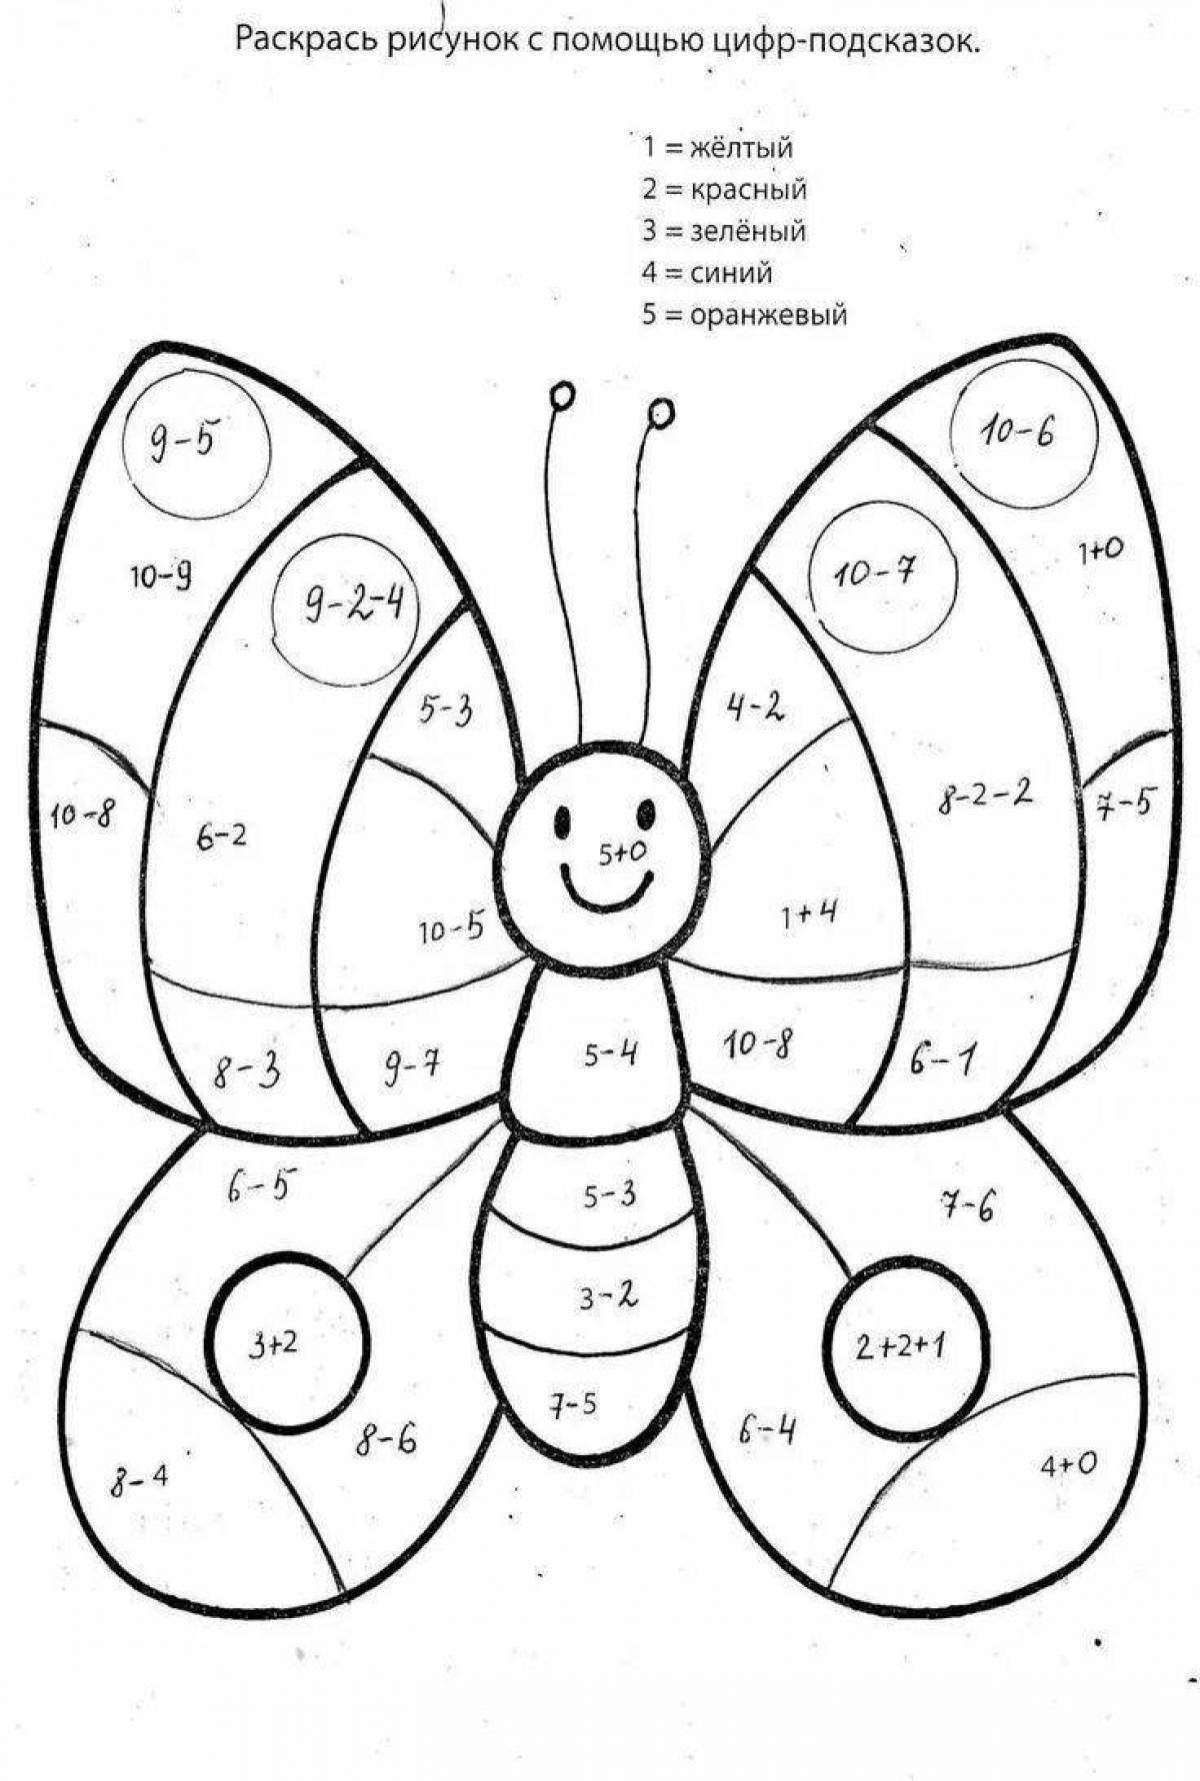 Intriguing math coloring book for 3-4 year olds